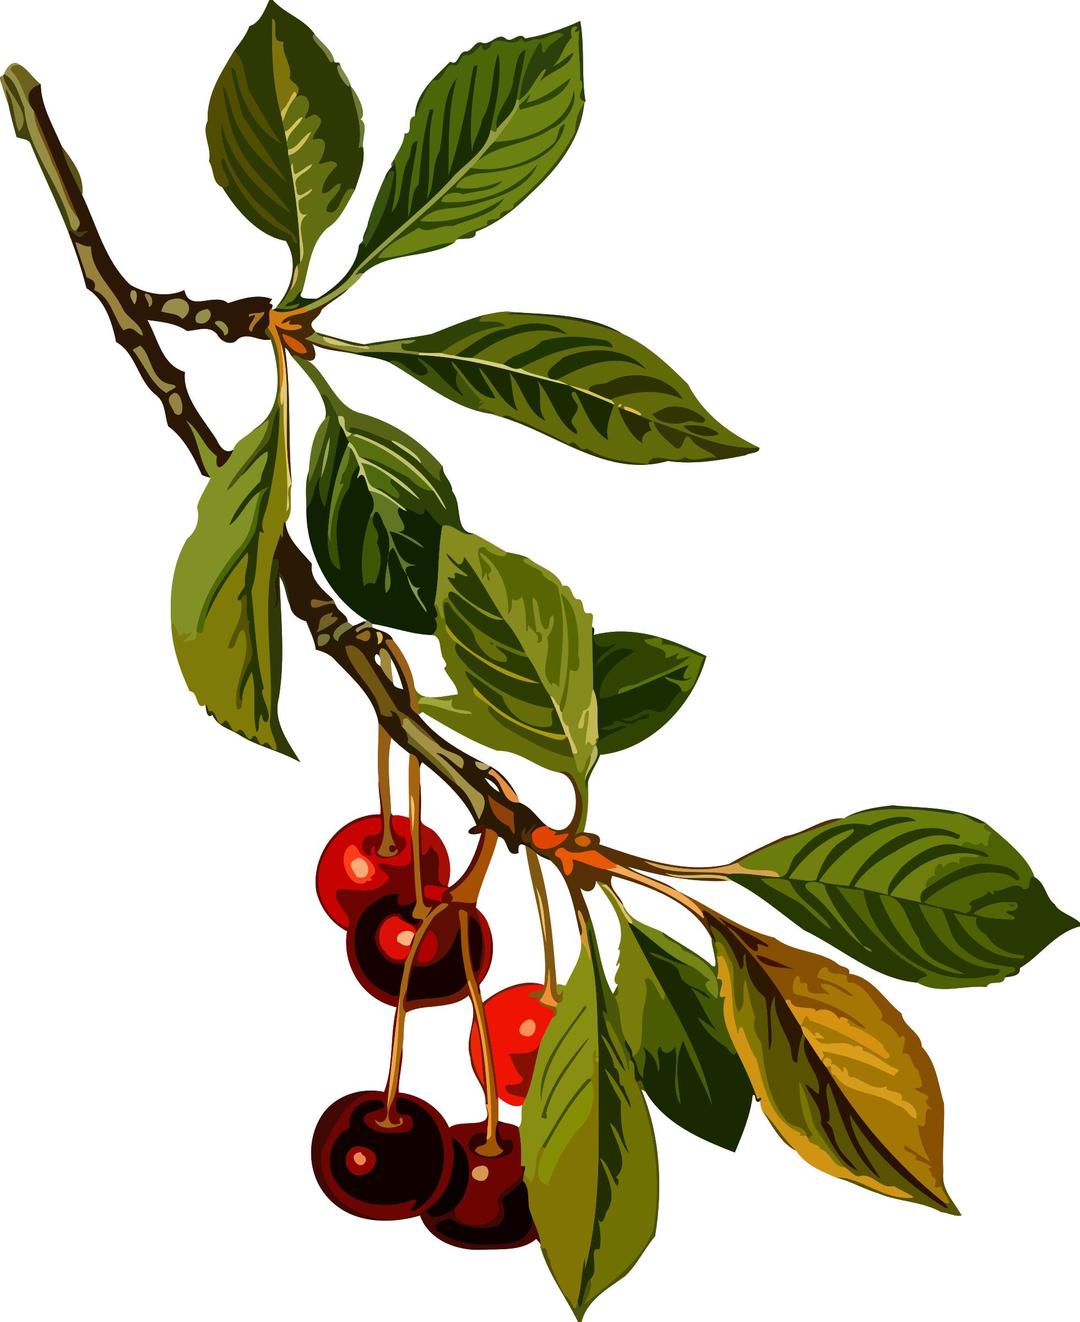 Sour cherry tree 2 (low resolution) png transparent